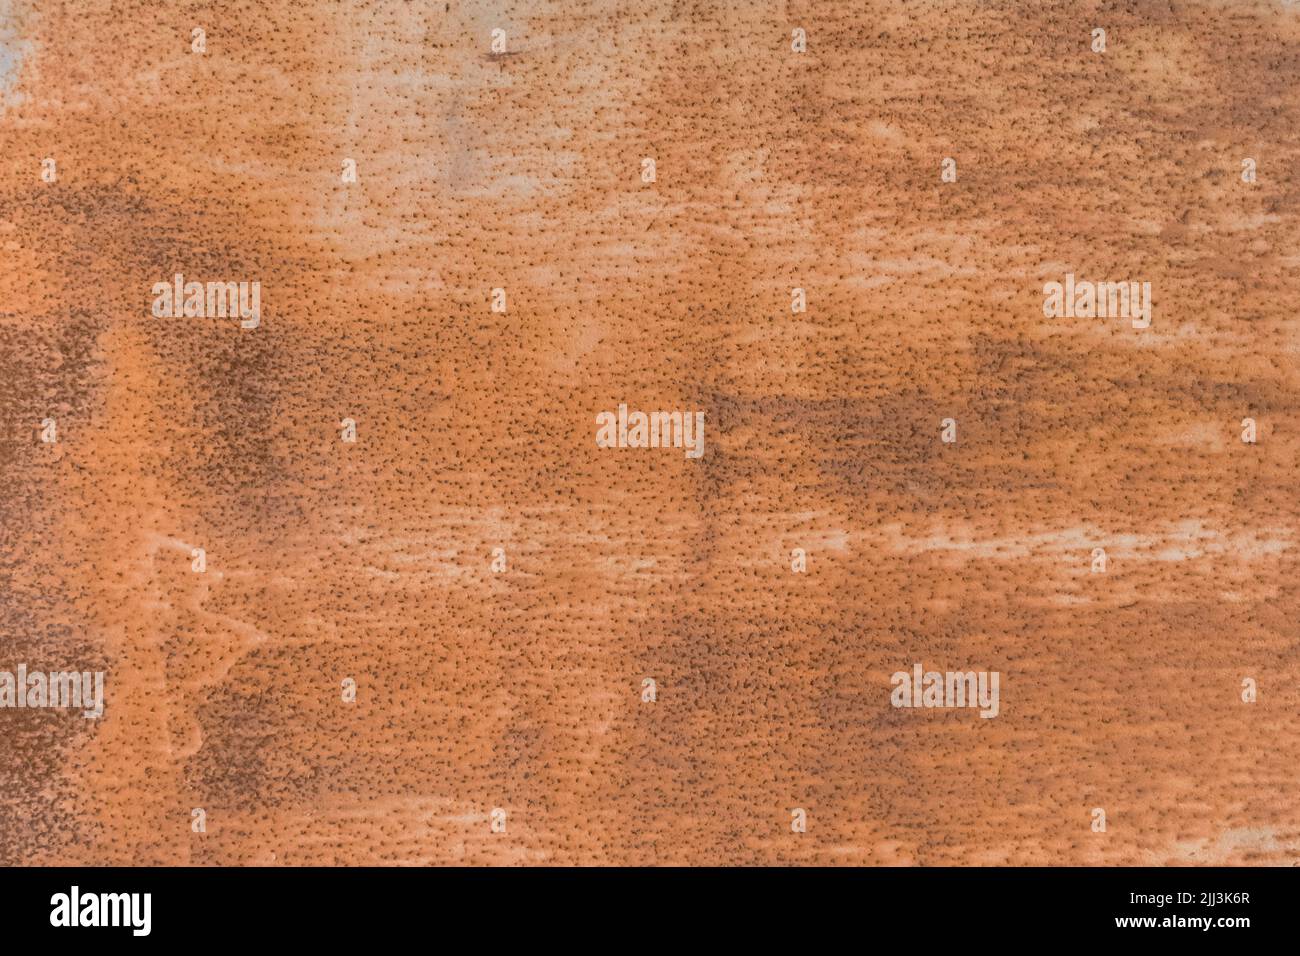 Metal rusty corrosion steel rust old brown grunge rough background texture. Stock Photo